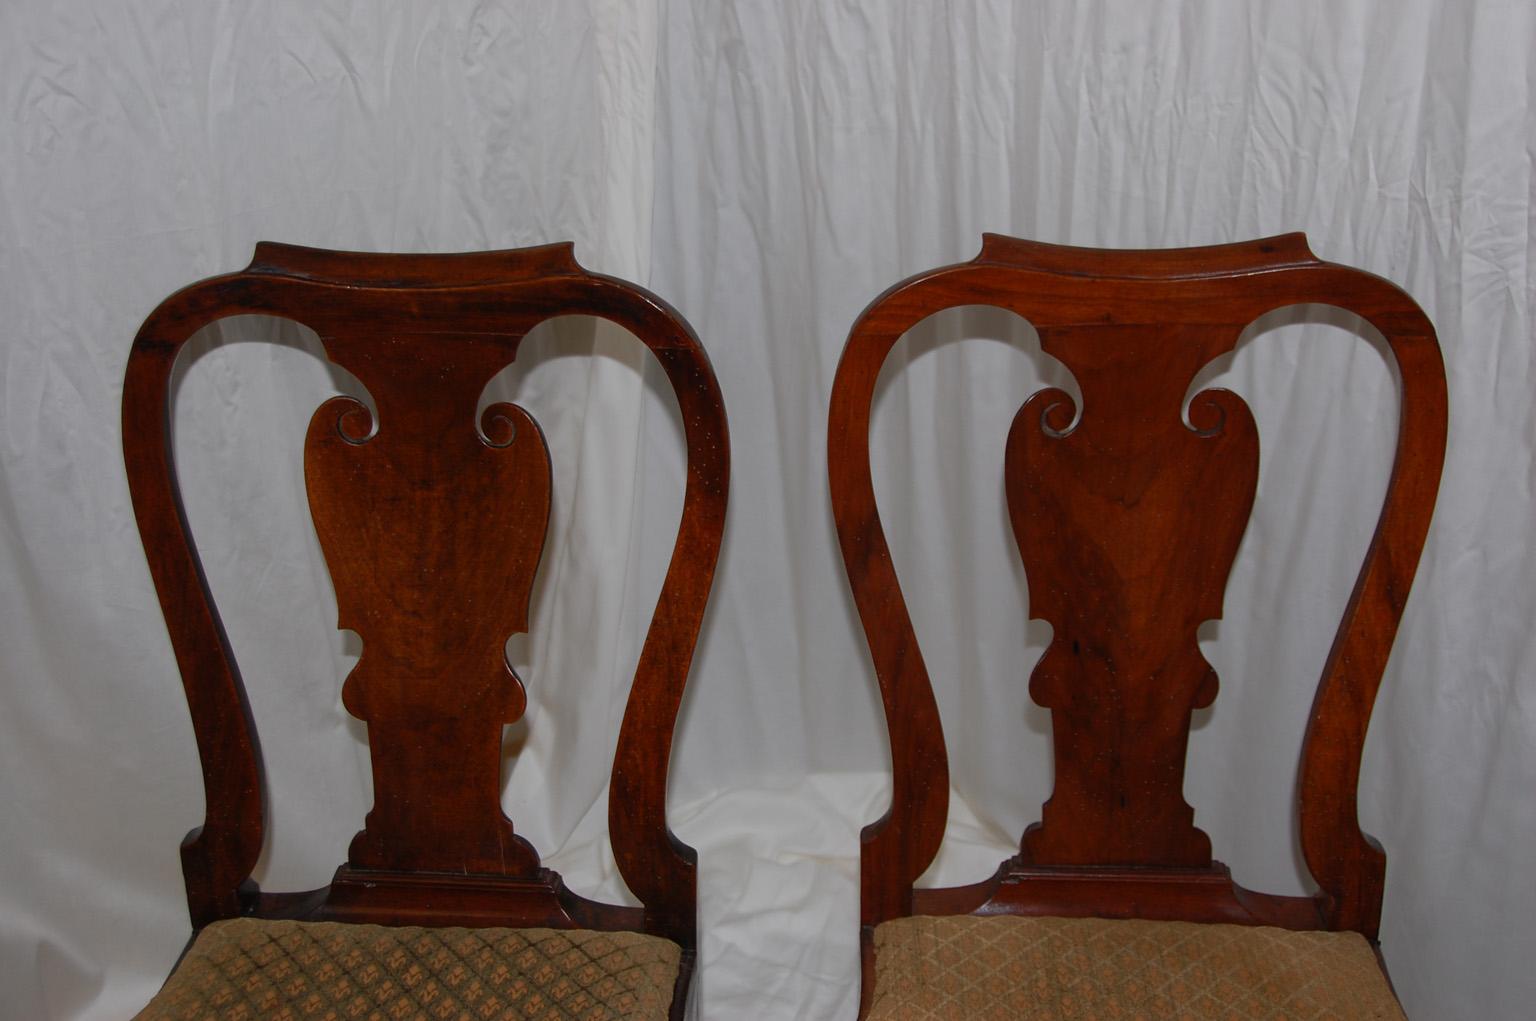 English Queen Anne Period 18th Century Walnut Pair of Balloon Seated Sidechairs For Sale 3